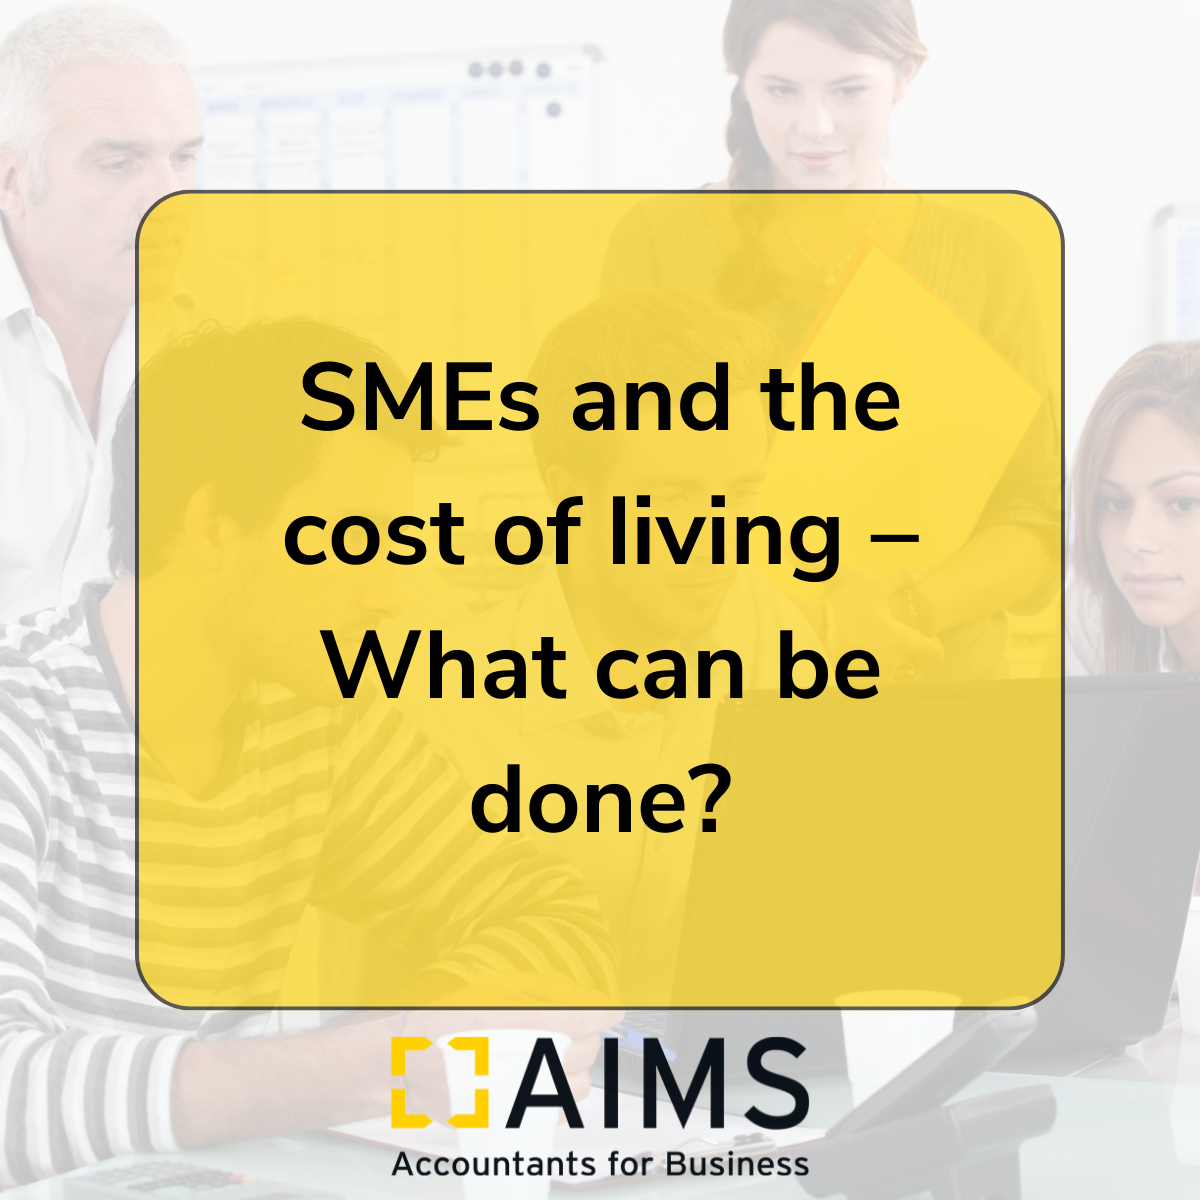 SMEs and the cost-of-living title image